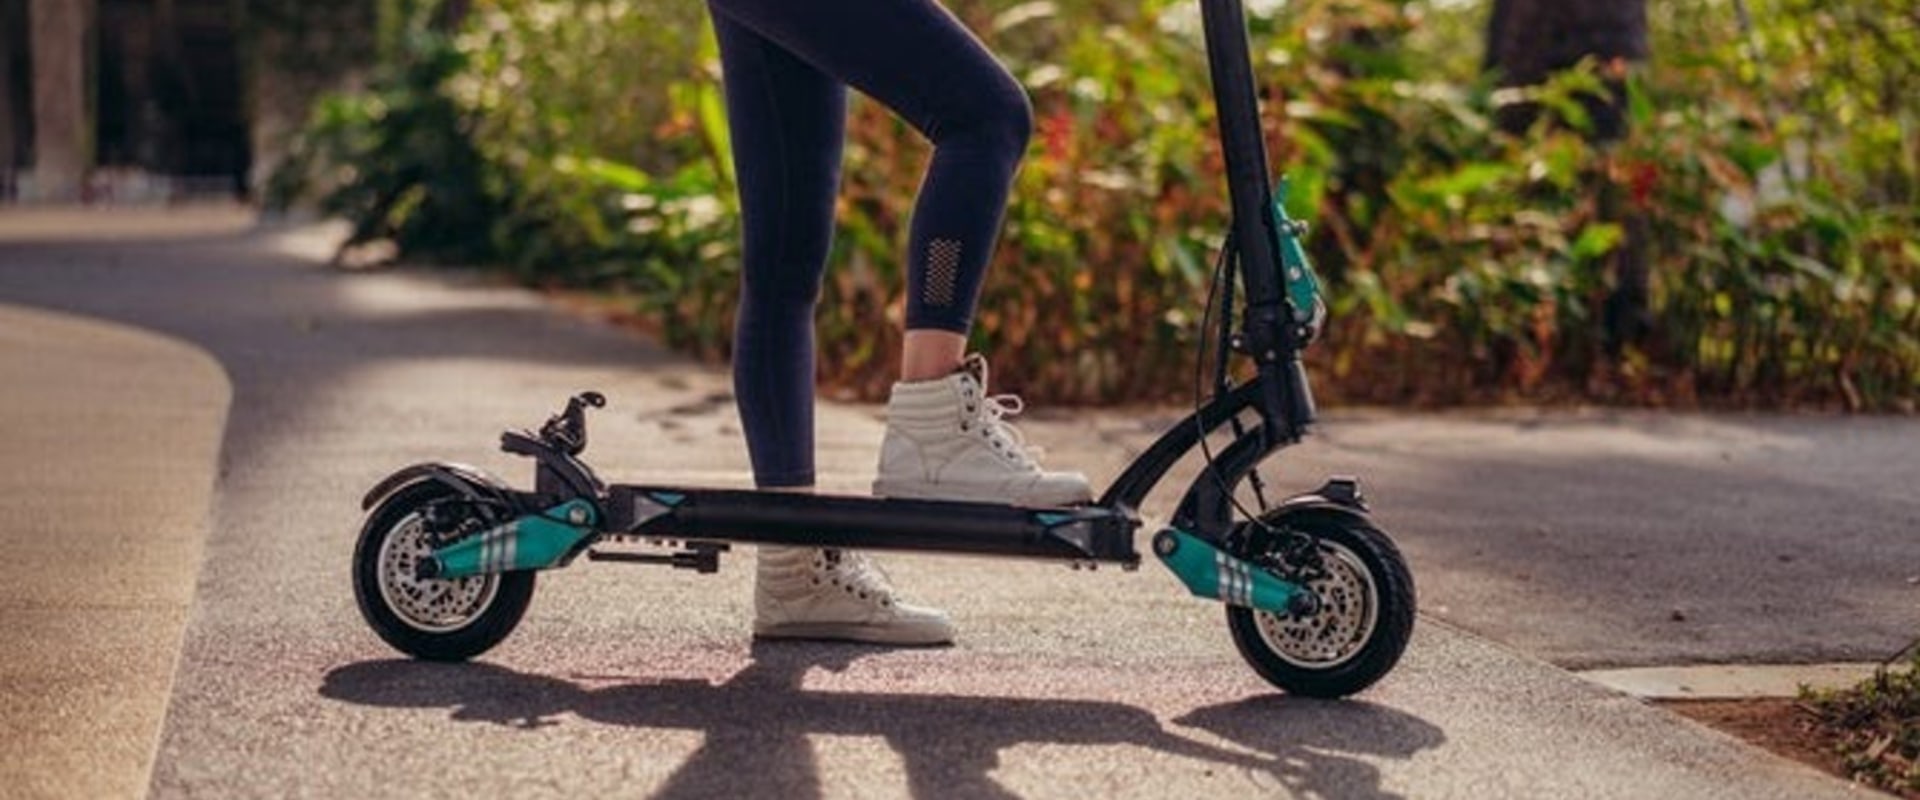 Do You Need a License to Drive an Electric Scooter in Quebec?